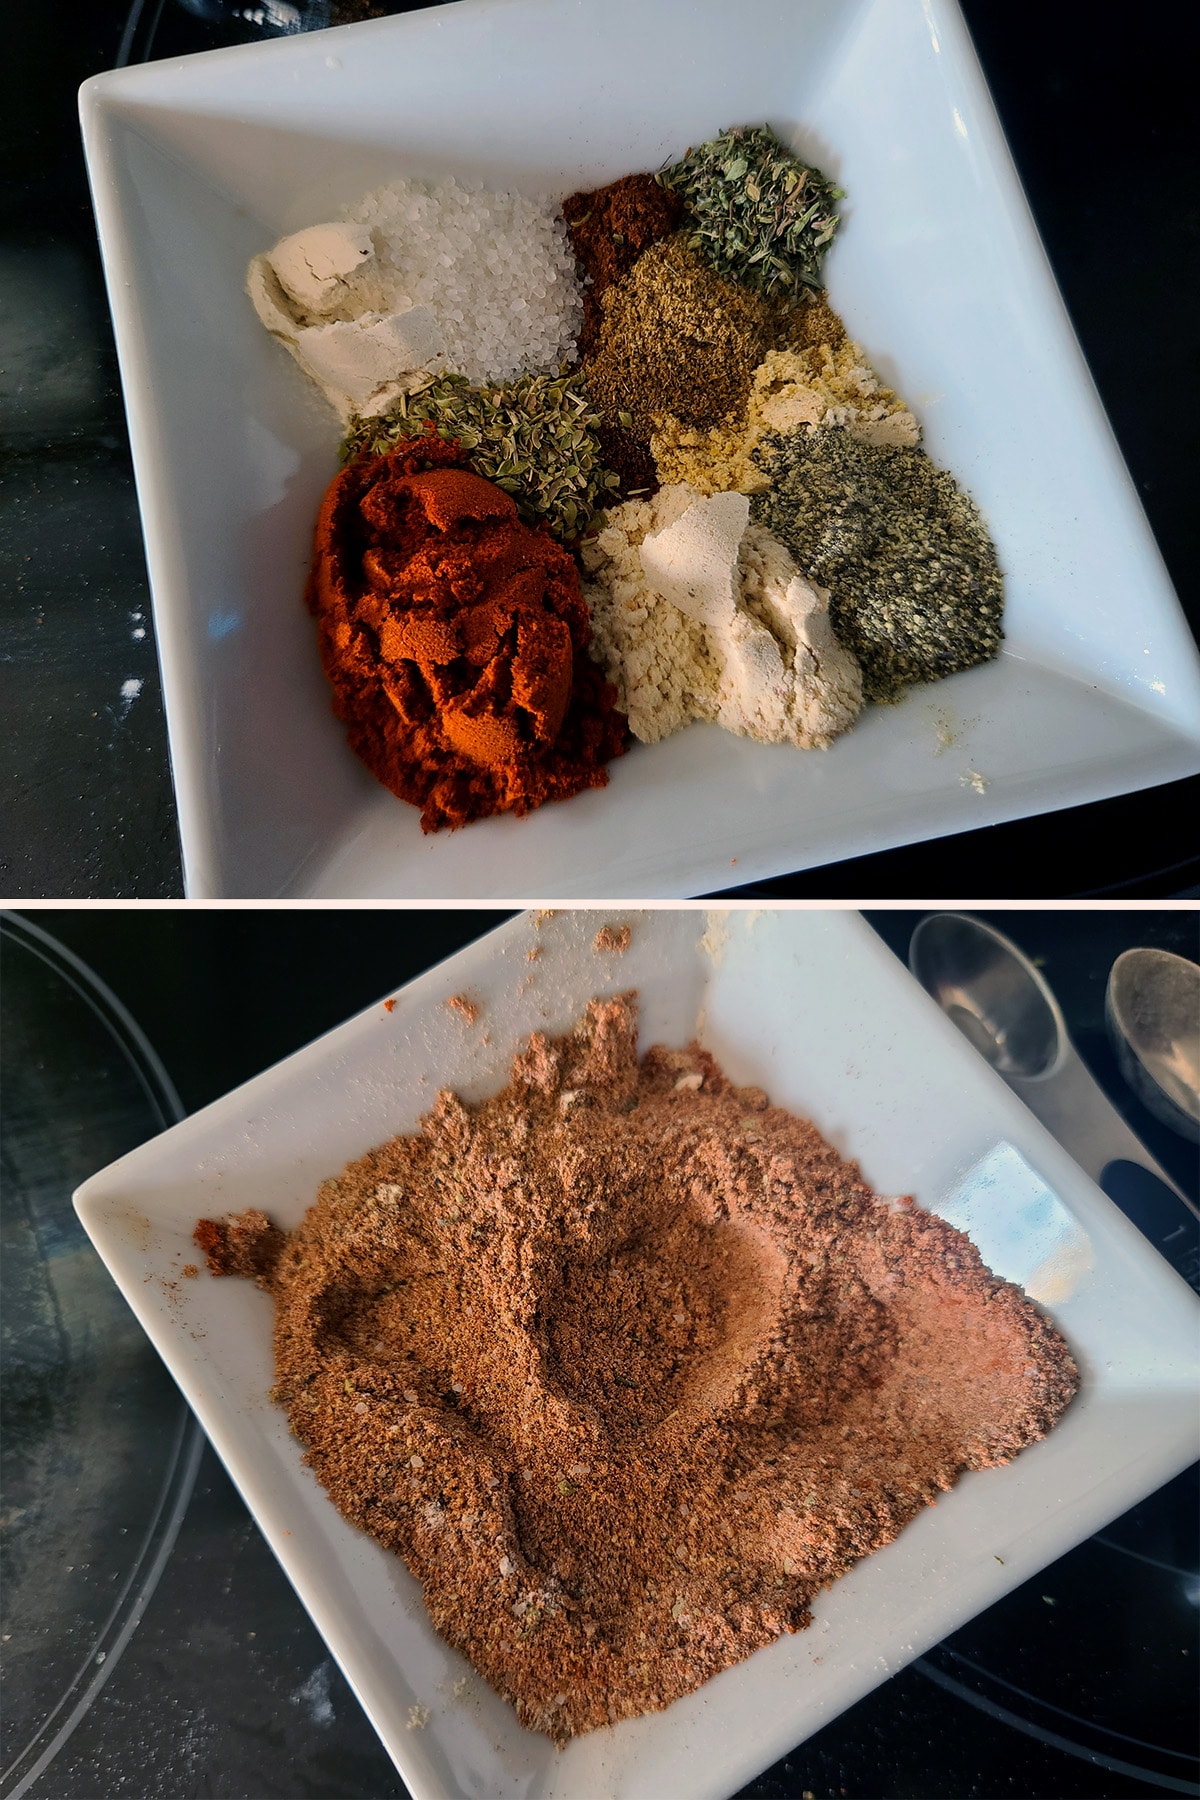 A two part image showing the ingredients for a rub, before and after being mixed in a small bowl.